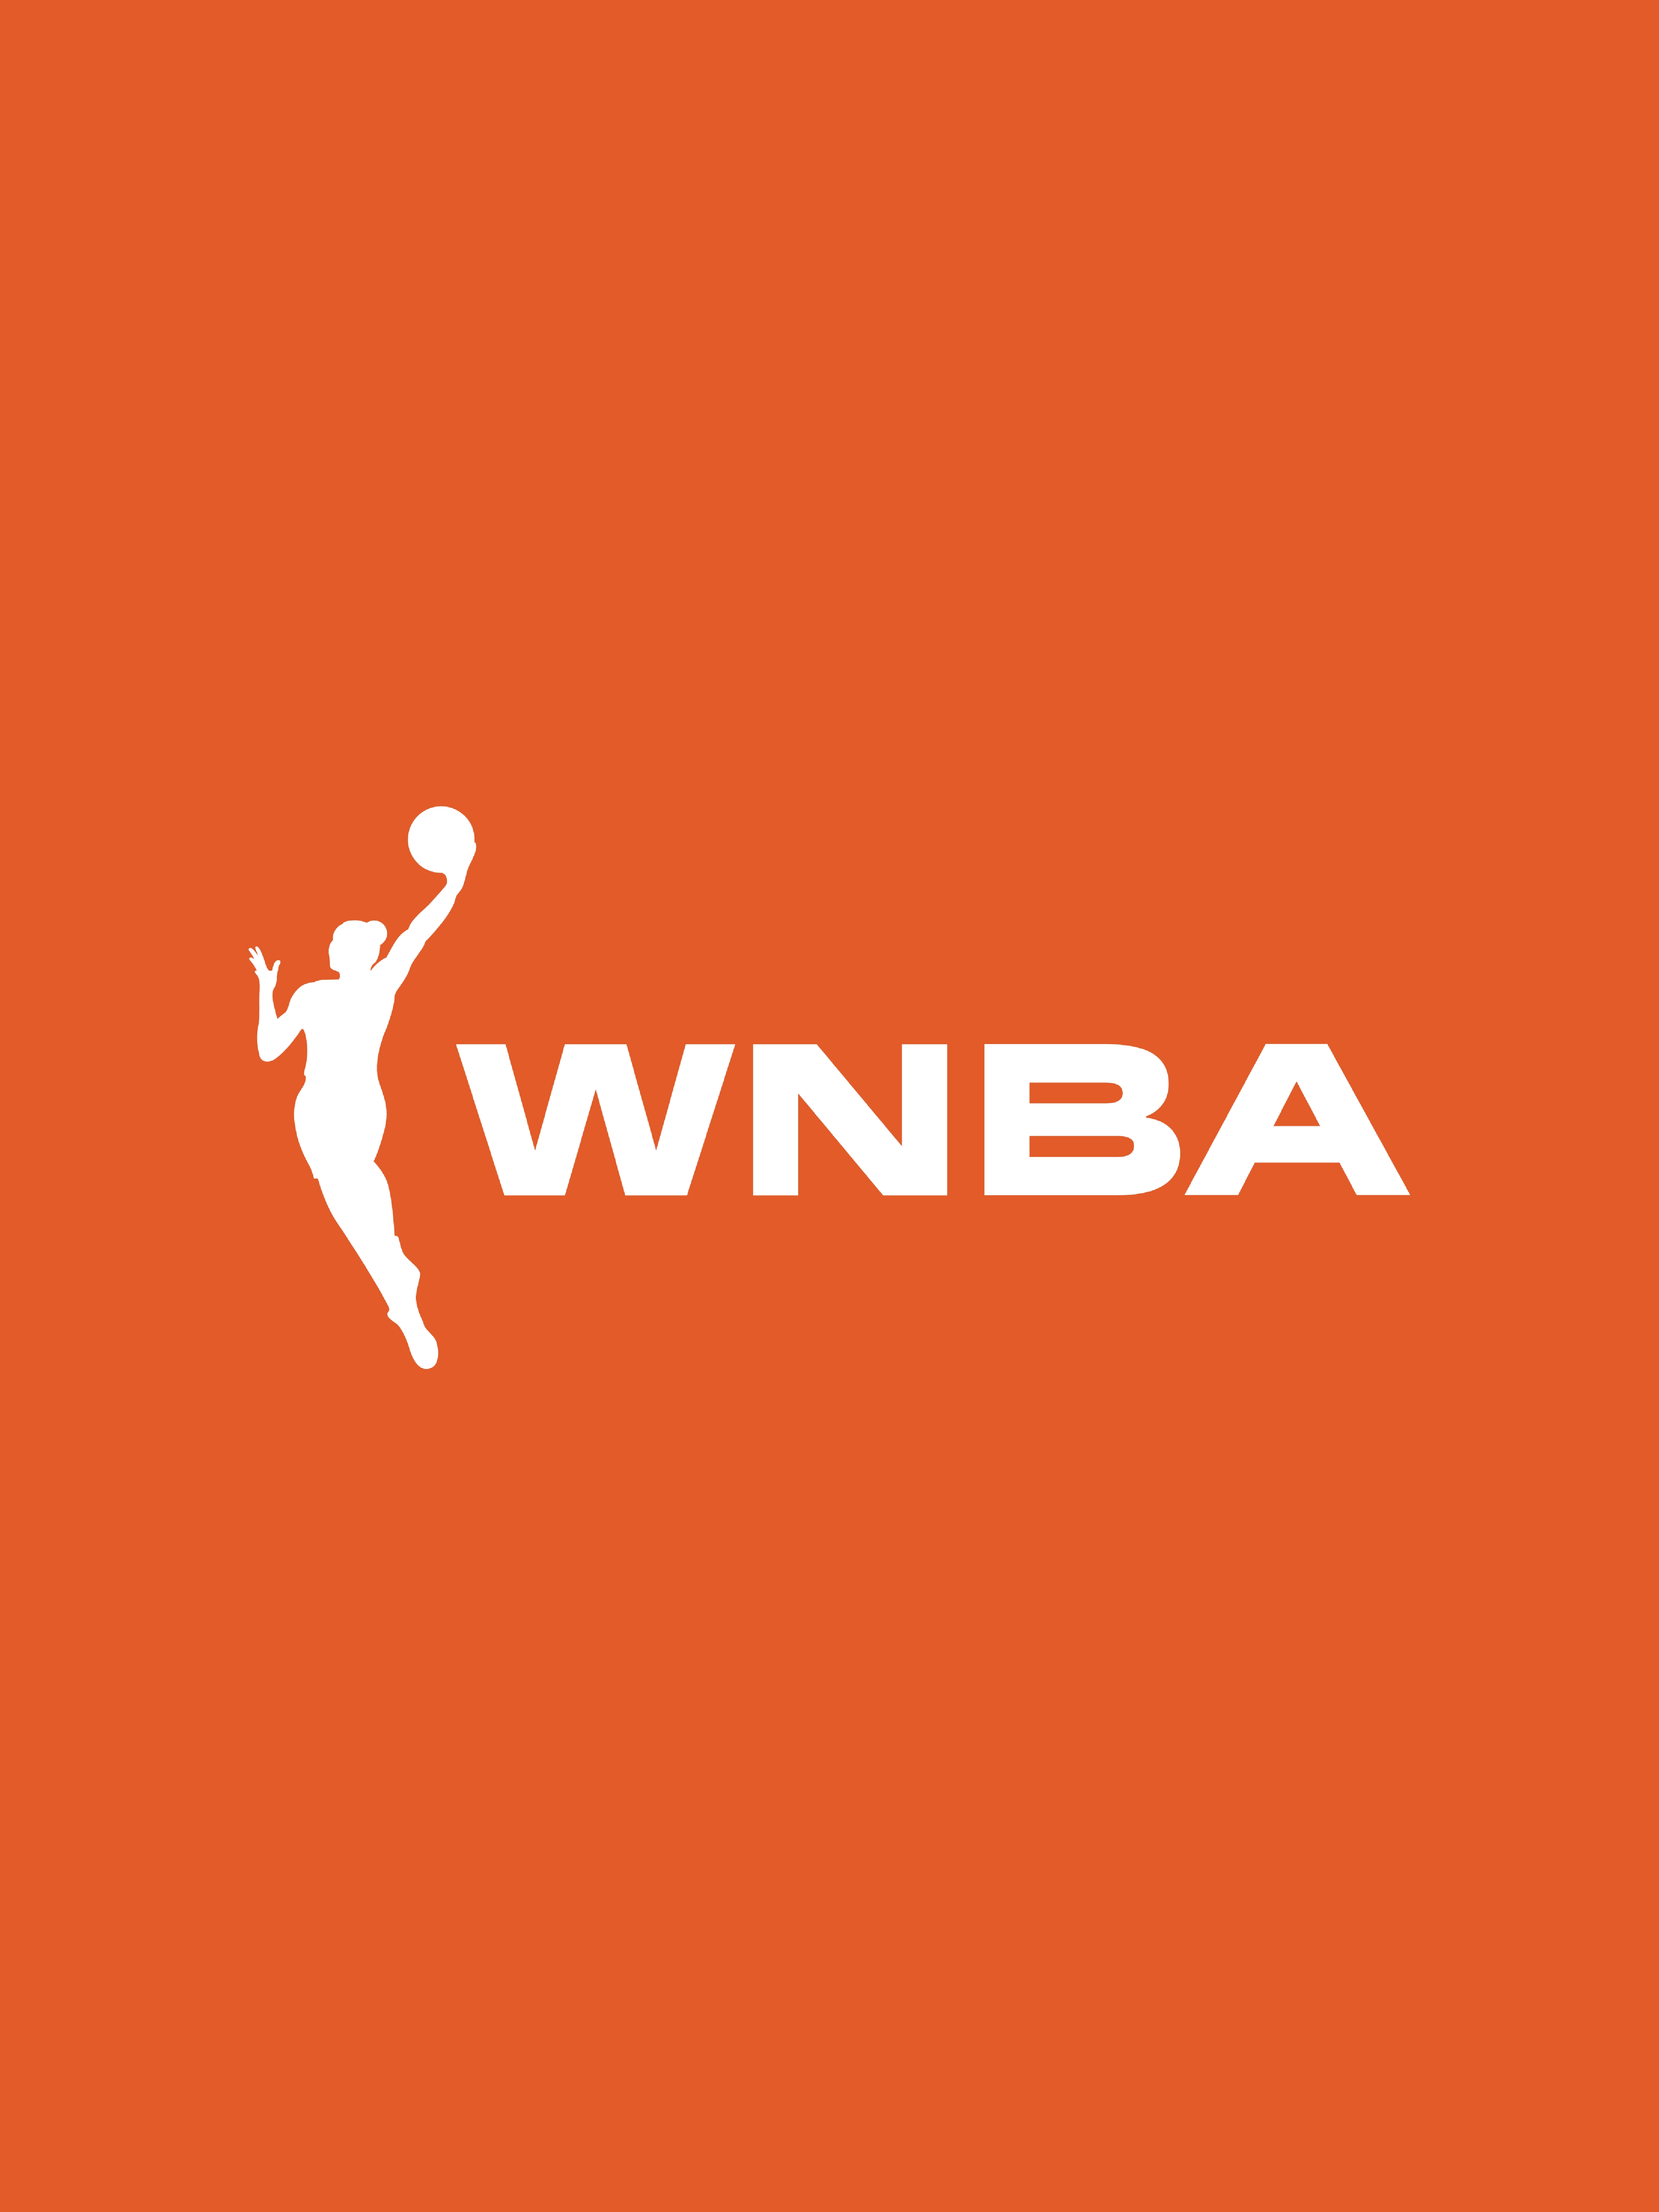 Moving sport forward with the WNBA